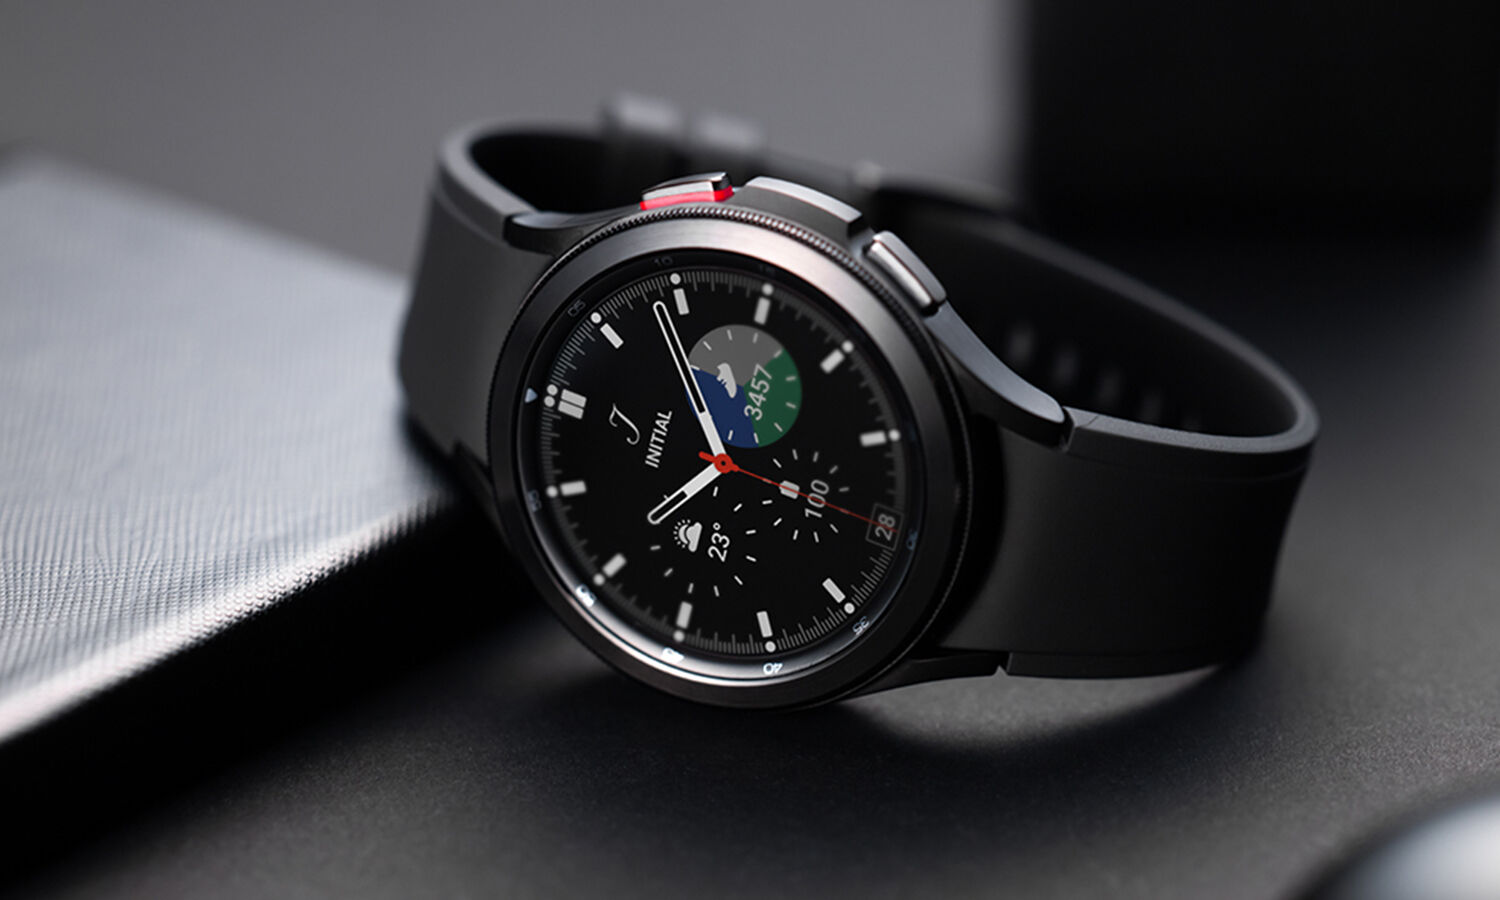 Samsung Galaxy Watch 5 Pro, Galaxy Watch 5 launch this month, know the features and price of Smartwatch